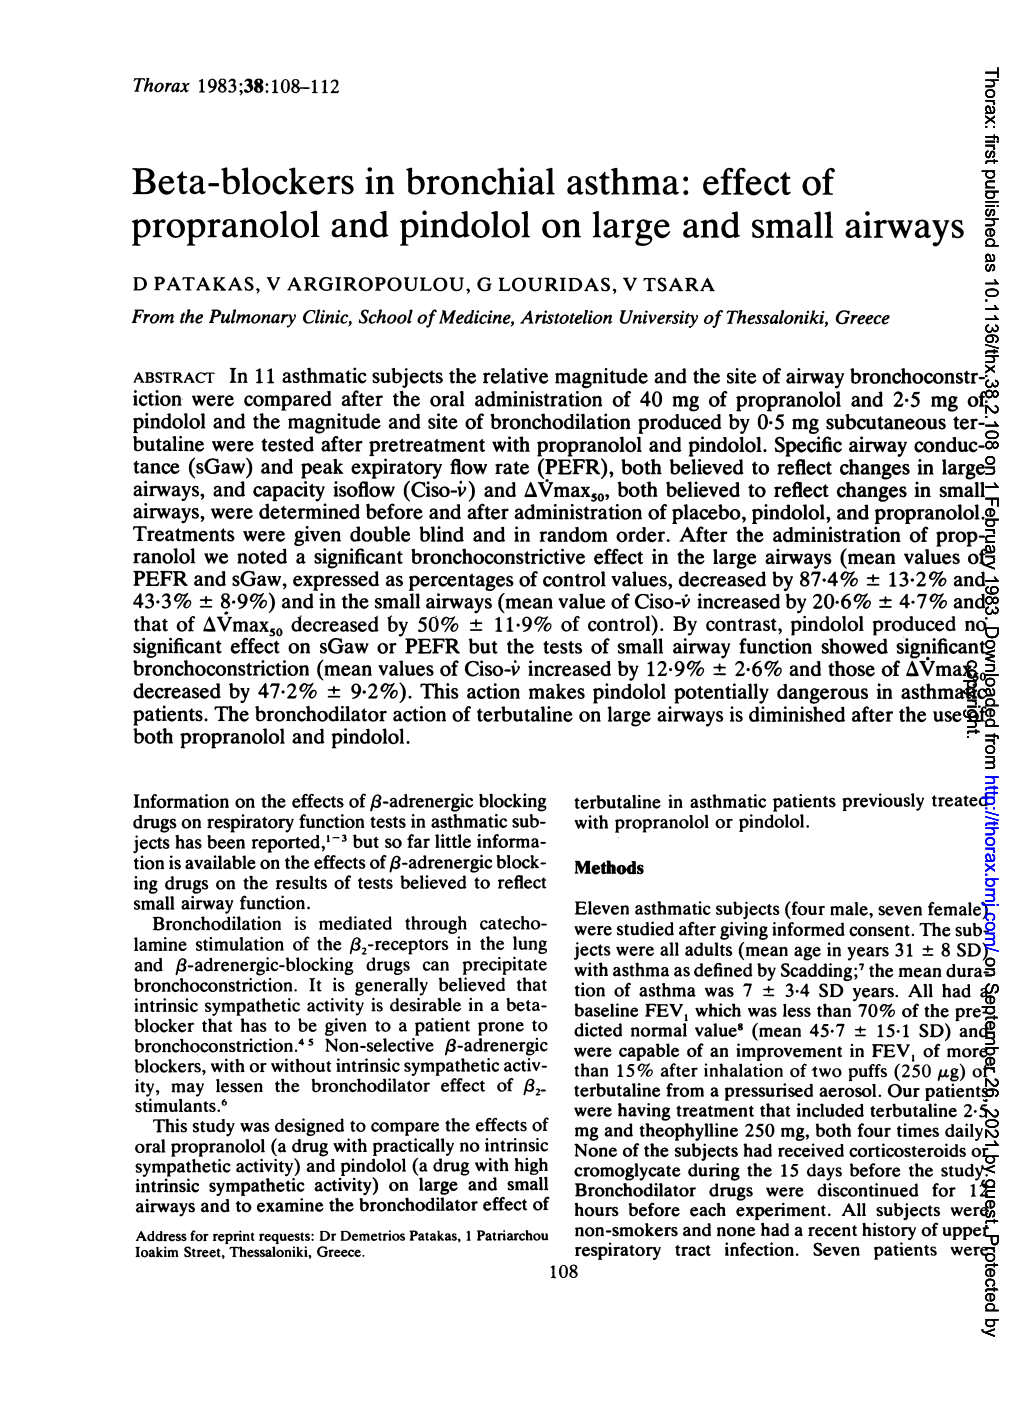 Effect of Propranolol and Pindolol on Large and Small Airways